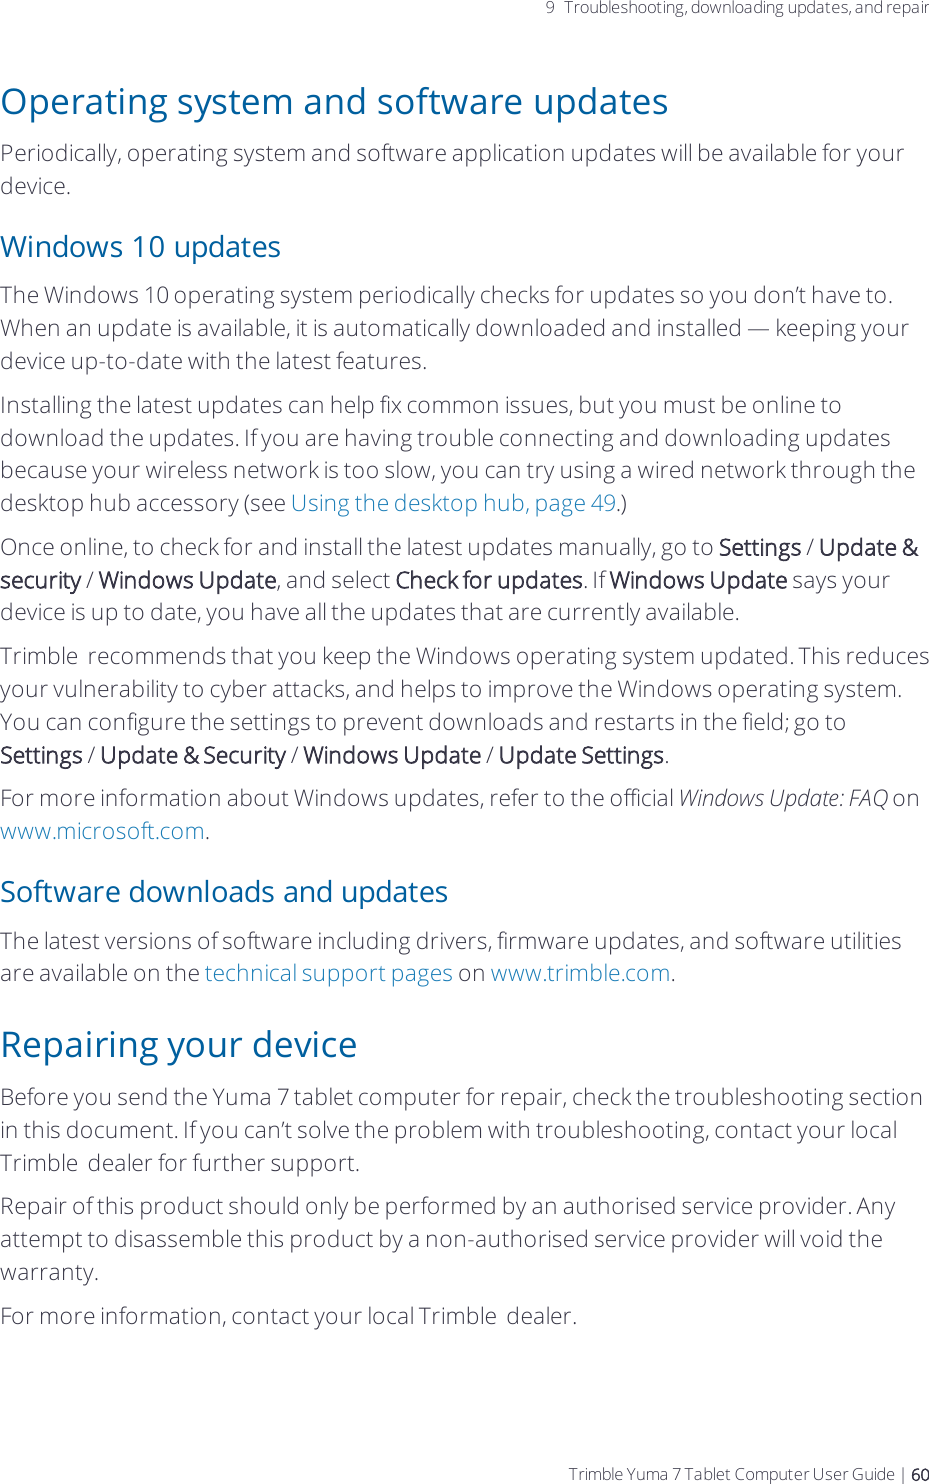 9 Troubleshooting, downloading updates, and repairOperating system and software updatesPeriodically, operating system and software application updates will be available for your device. Windows 10 updatesThe Windows 10 operating system periodically checks for updates so you don’t have to. When an update is available, it is automatically downloaded and installed — keeping your device up-to-date with the latest features.Installing the latest updates can help fix common issues, but you must be online to download the updates. If you are having trouble connecting and downloading updates because your wireless network is too slow, you can try using a wired network through the desktop hub accessory (see Using the desktop hub, page 49.)Once online, to check for and install the latest updates manually, go to Settings / Update &amp; security / Windows Update, and select Check for updates. If Windows Update says your device is up to date, you have all the updates that are currently available.Trimble  recommends that you keep the Windows operating system updated. This reduces your vulnerability to cyber attacks, and helps to improve the Windows operating system. You can configure the settings to prevent downloads and restarts in the field; go to Settings / Update &amp; Security / Windows Update / Update Settings.For more information about Windows updates, refer to the official Windows Update: FAQ on www.microsoft.com.Software downloads and updatesThe latest versions of software including drivers, firmware updates, and software utilities are available on the technical support pages on www.trimble.com.Repairing your deviceBefore you send the  Yuma 7 tablet computer for repair, check the troubleshooting section in this document. If you can’t solve the problem with troubleshooting, contact your local Trimble  dealer for further support.Repair of this product should only be performed by an authorised service provider. Any attempt to disassemble this product by a non-authorised service provider will void the warranty.For more information, contact your local Trimble  dealer.Trimble Yuma 7 Tablet Computer User Guide | 60